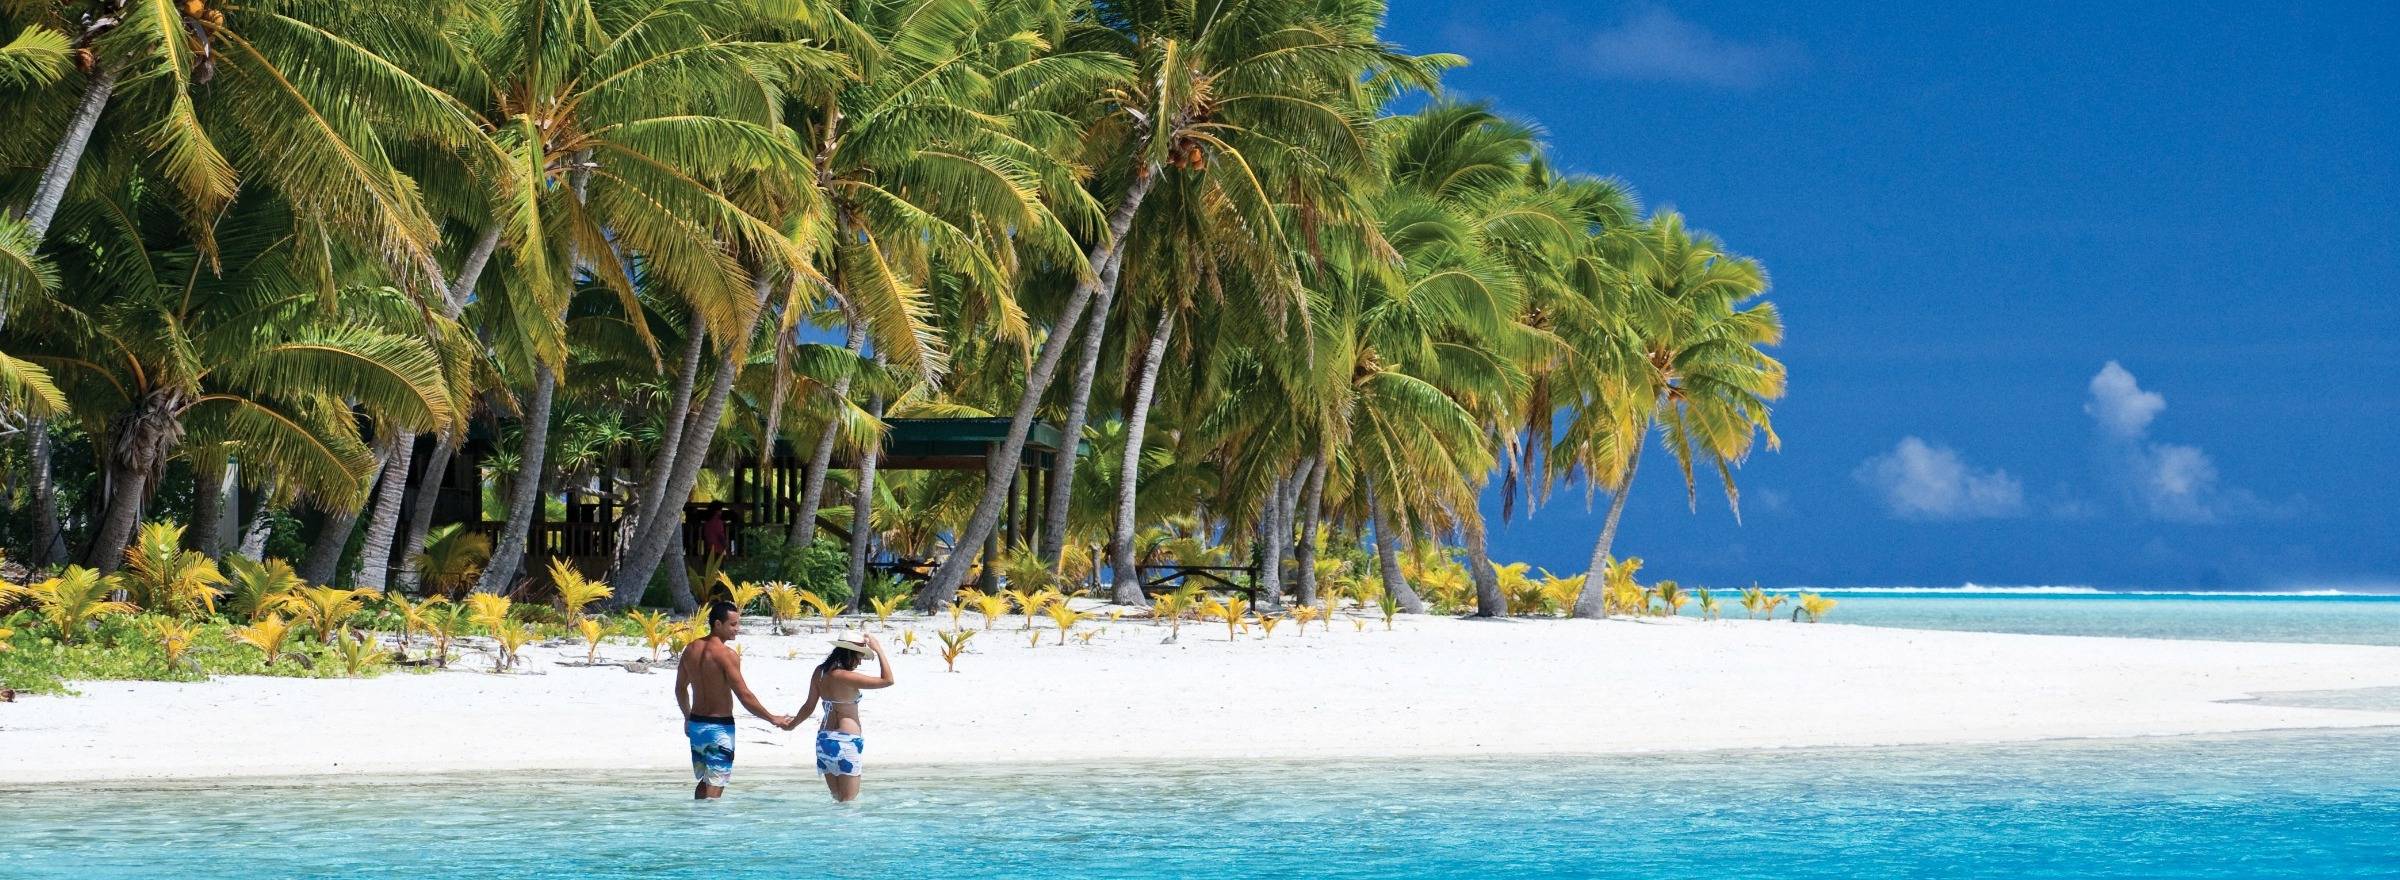 10 things to do in the cook islands